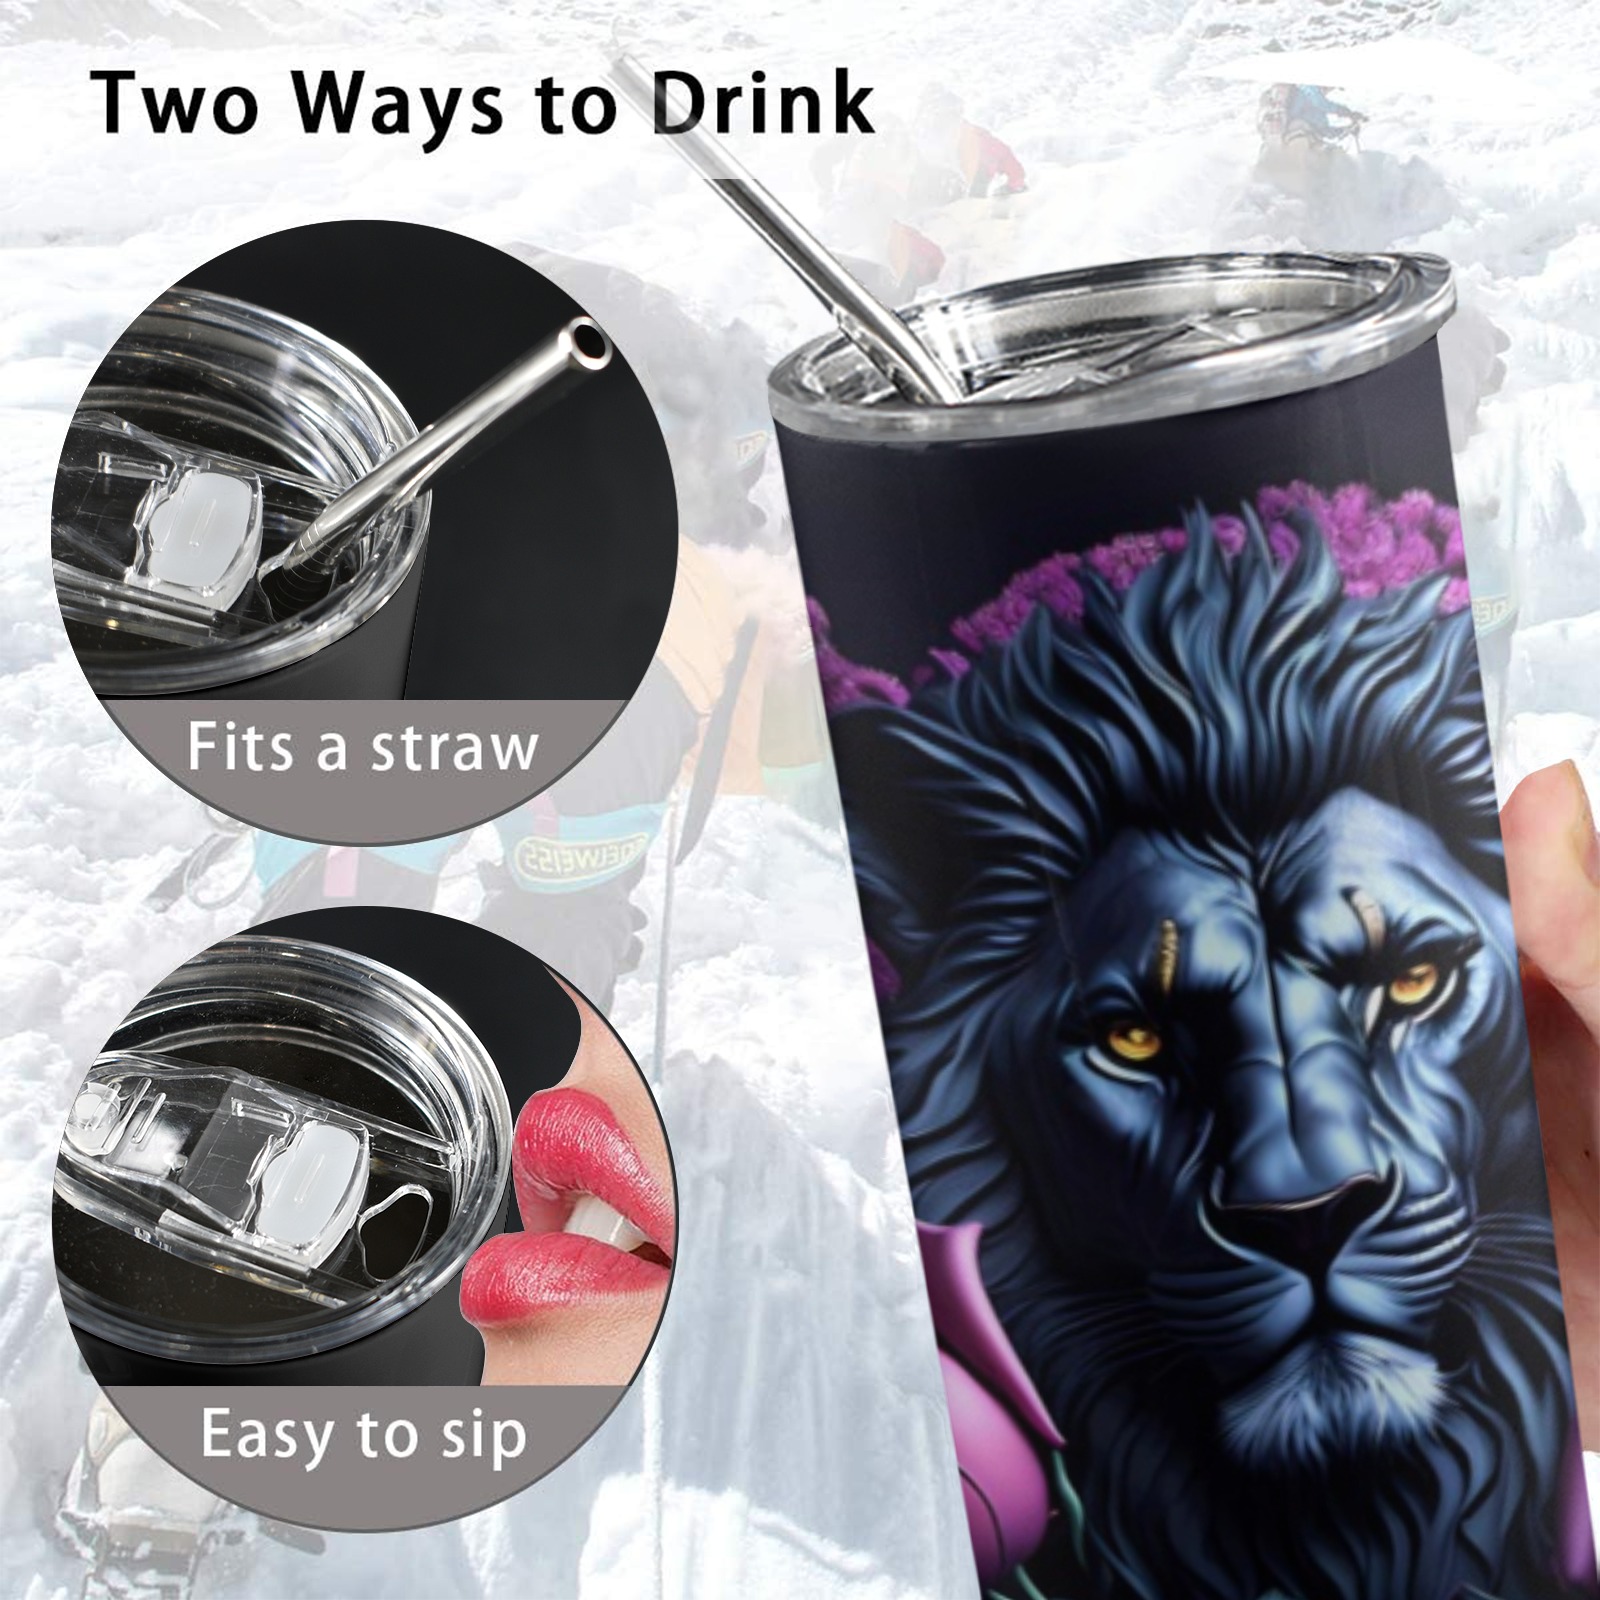 Lion With Purple Roses - 20oz Tall Skinny Tumbler with Lid and Straw